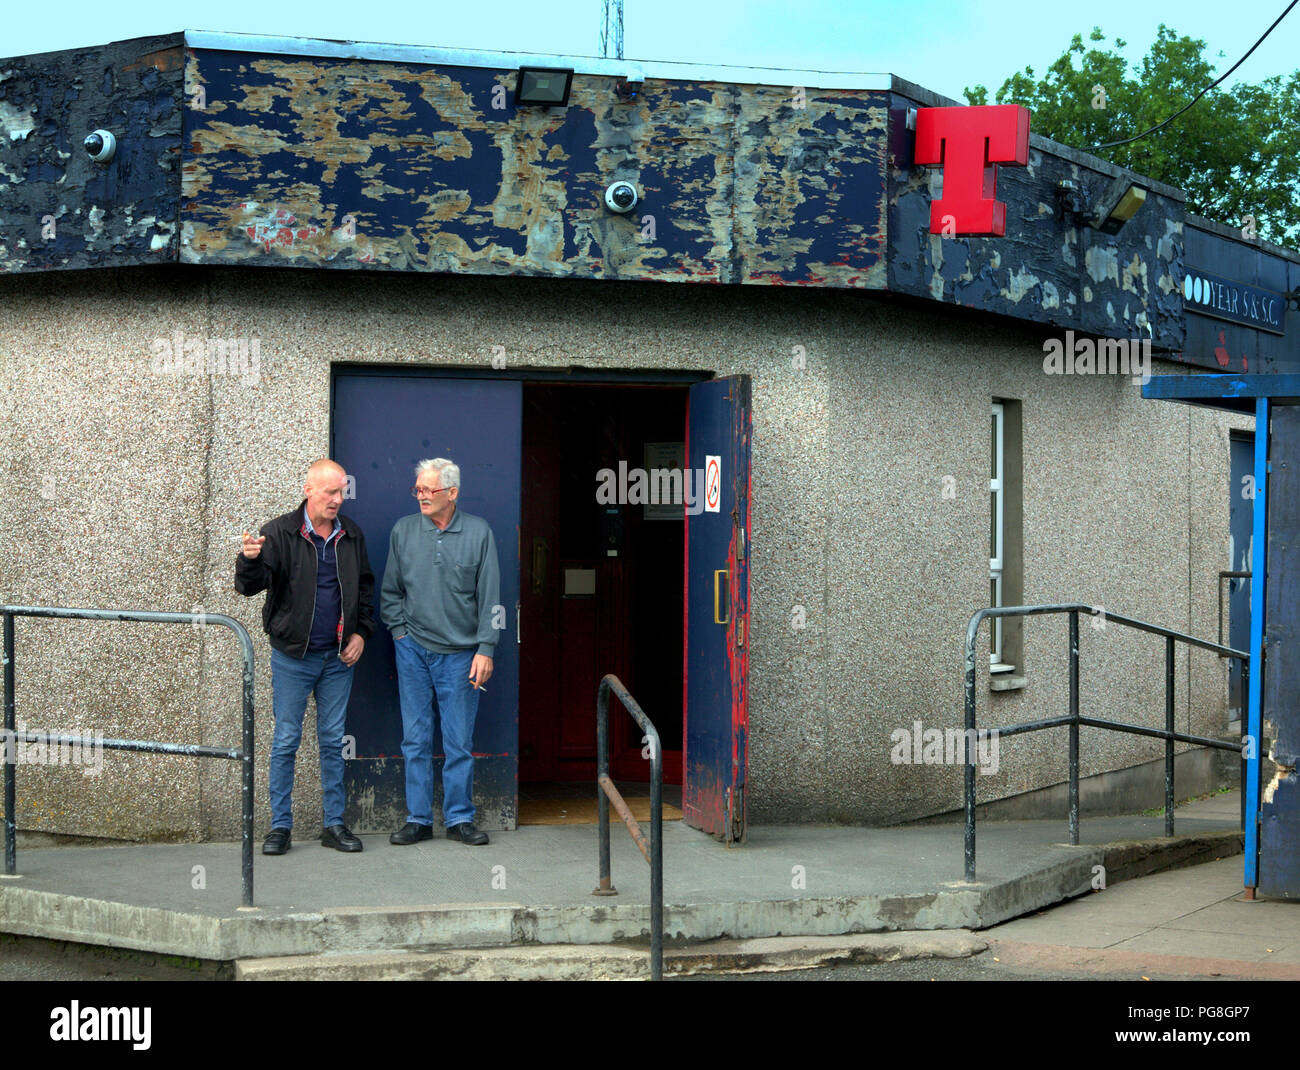 Glasgow, Scotland, UK. 24th Aug, 2018. UK Weather: Brighter weather sees locals unsure of rain or shine as life goes and locals discuss the weather at the door of Goodyear Sports & Social Club in Drumchapel. Credit: gerard ferry/Alamy Live News Stock Photo